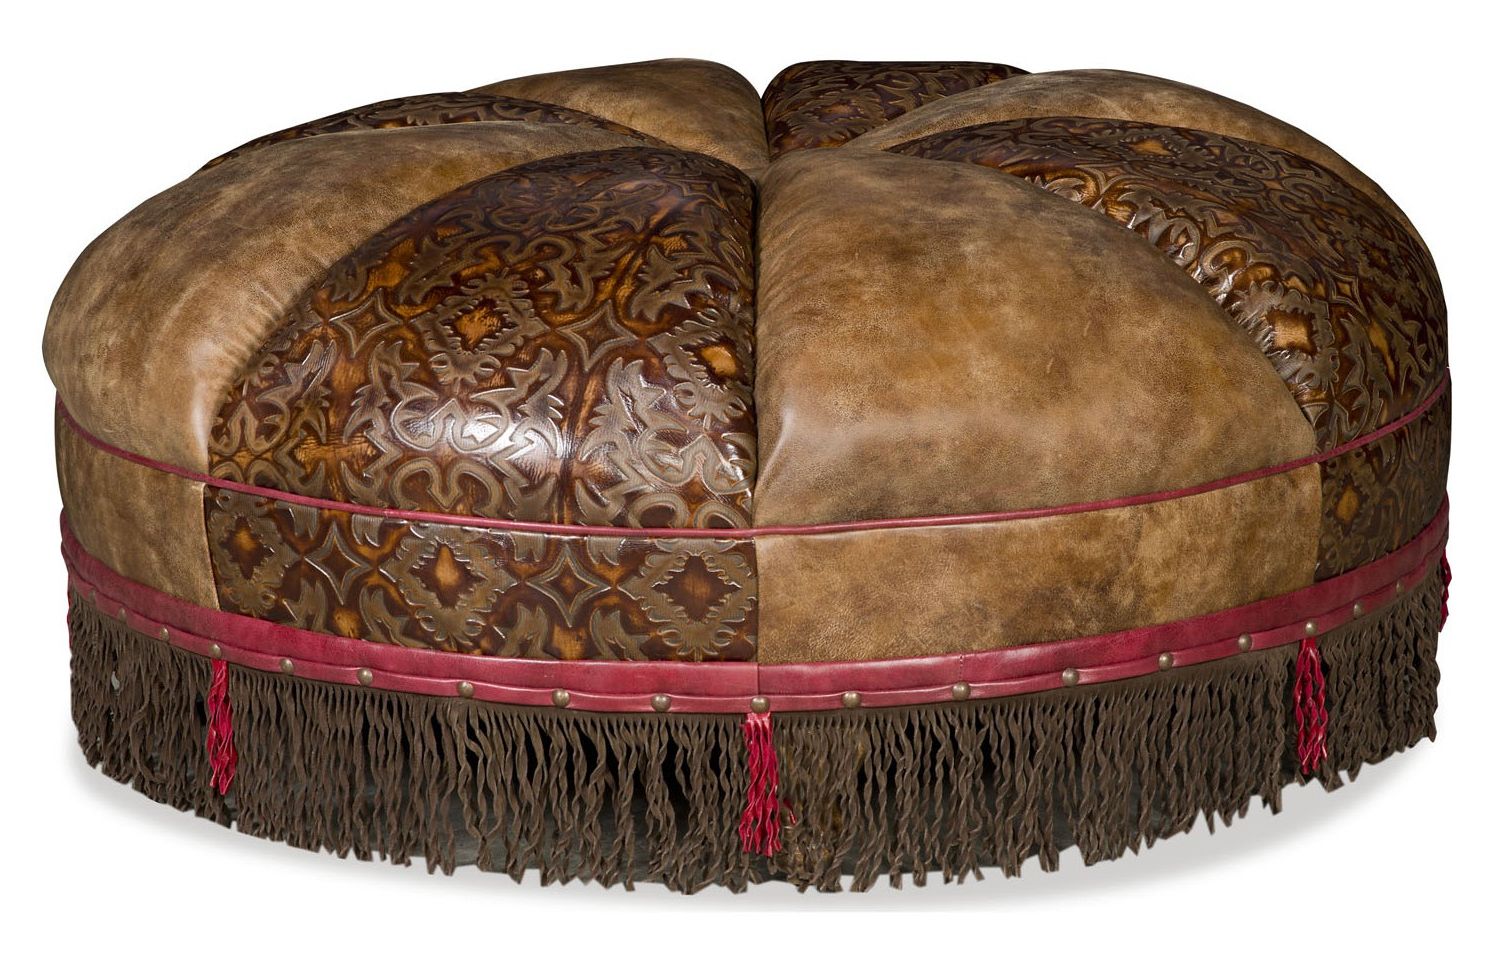 Leather Pouf Ottomans Intended For Most Up To Date Round Leather Ottoman With Embossed Leather And Fringed Detail (View 9 of 10)